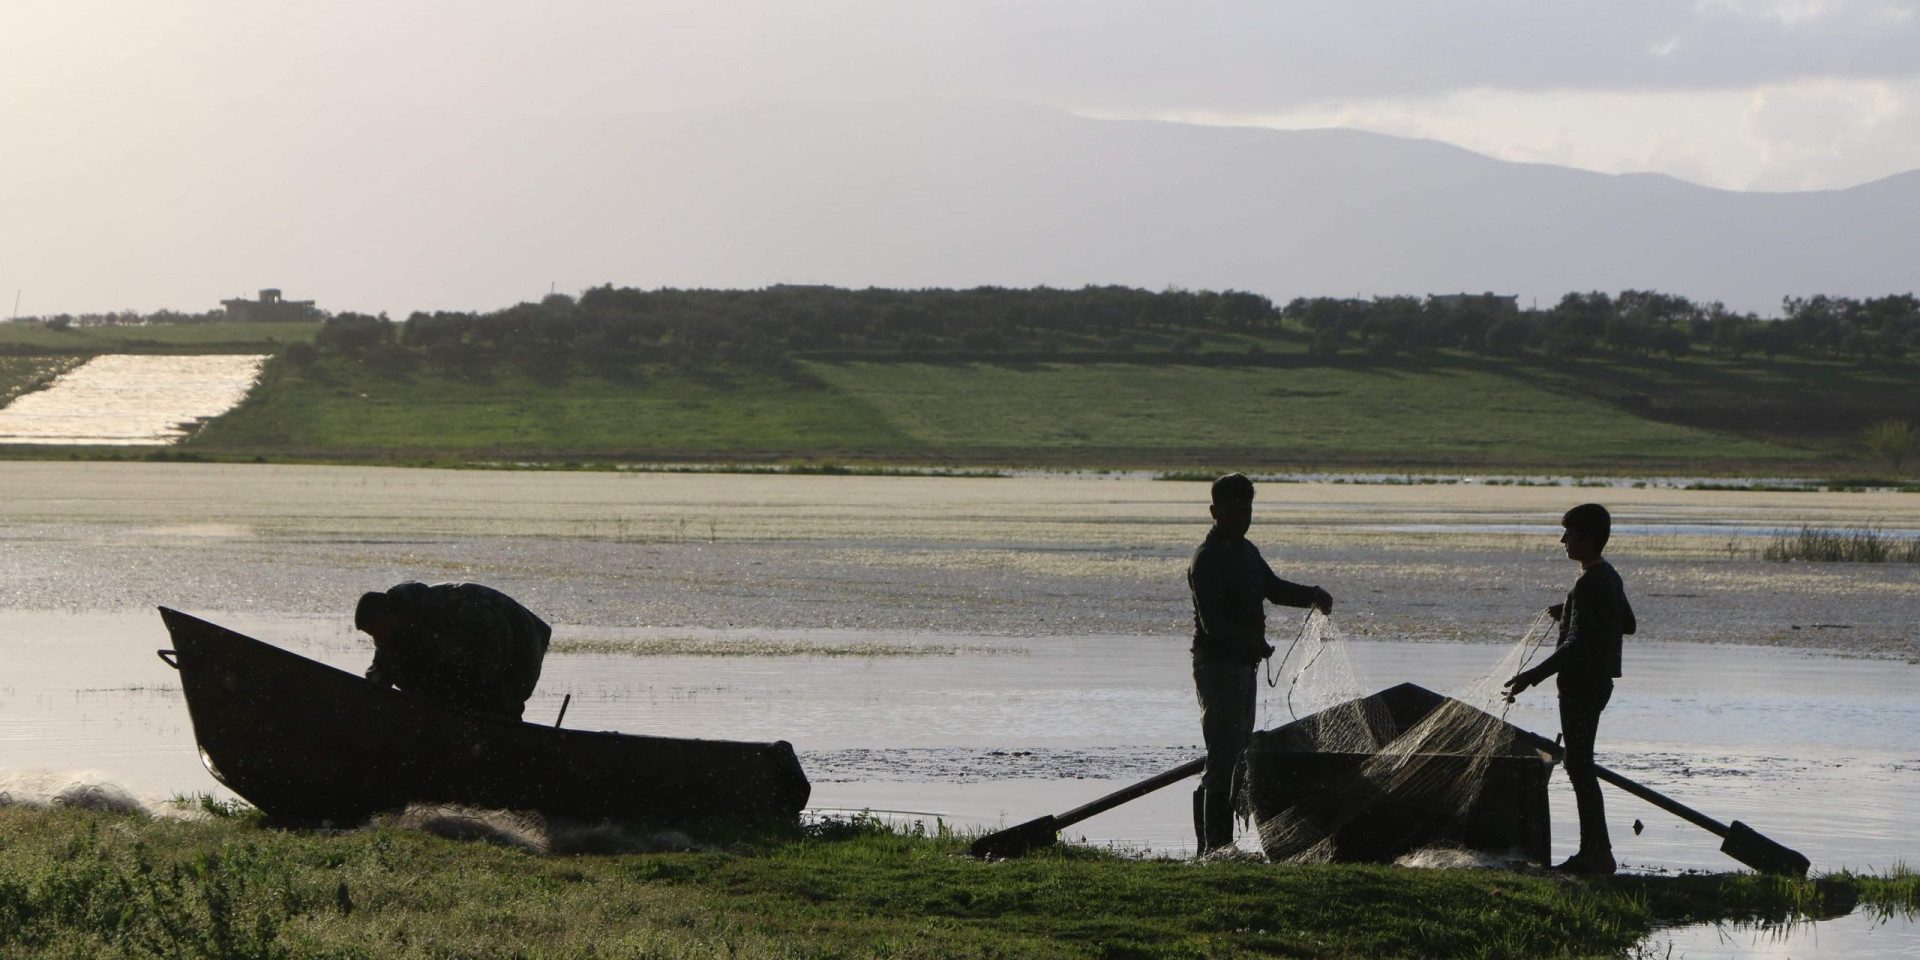 the silhouettes of two fishermen and their boat in front of a lake, in the light of dusk